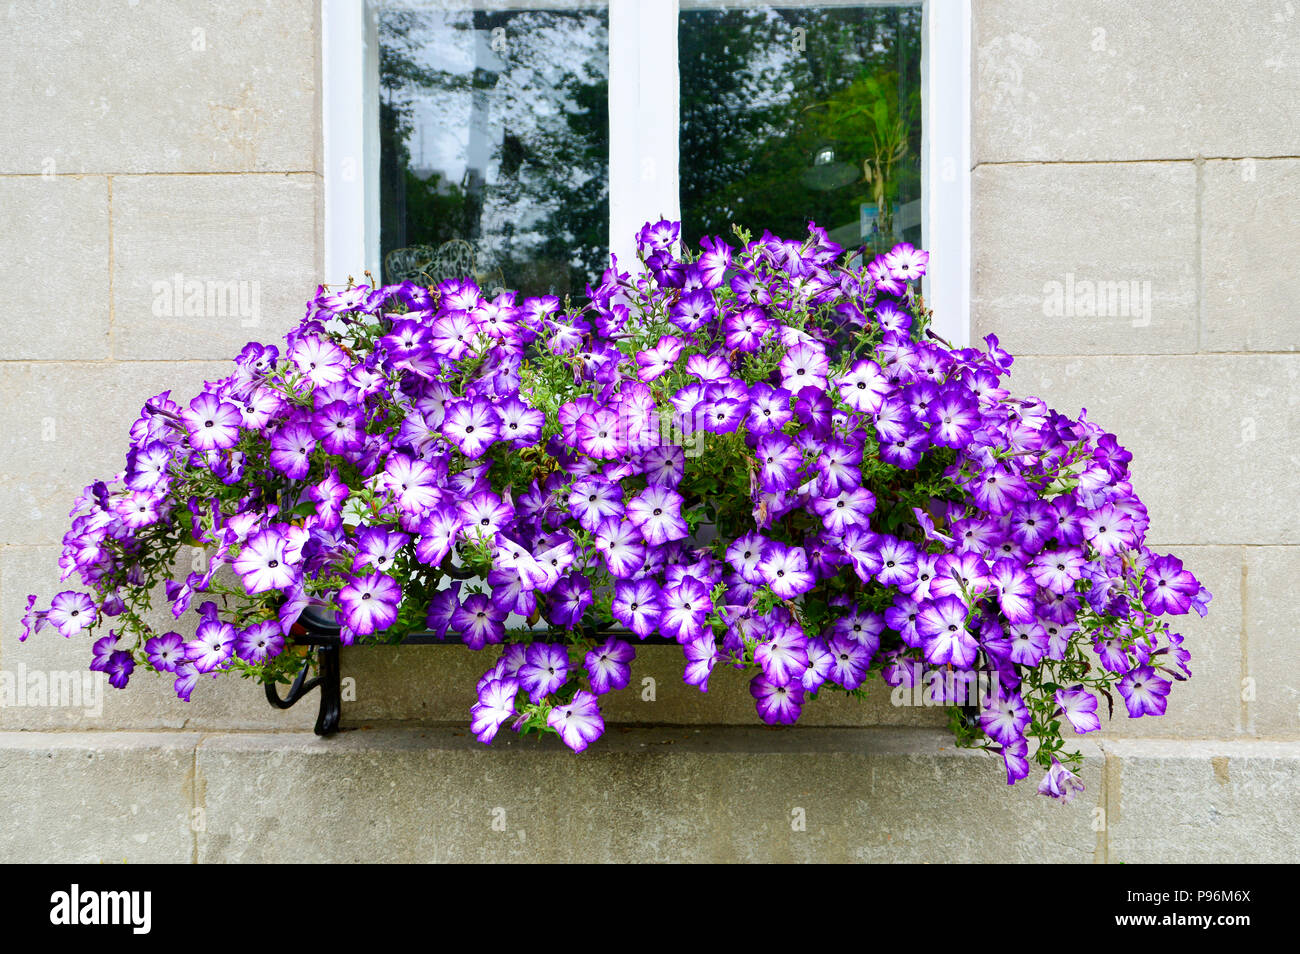 Picturesque window box with overflowing flowers. Stock Photo